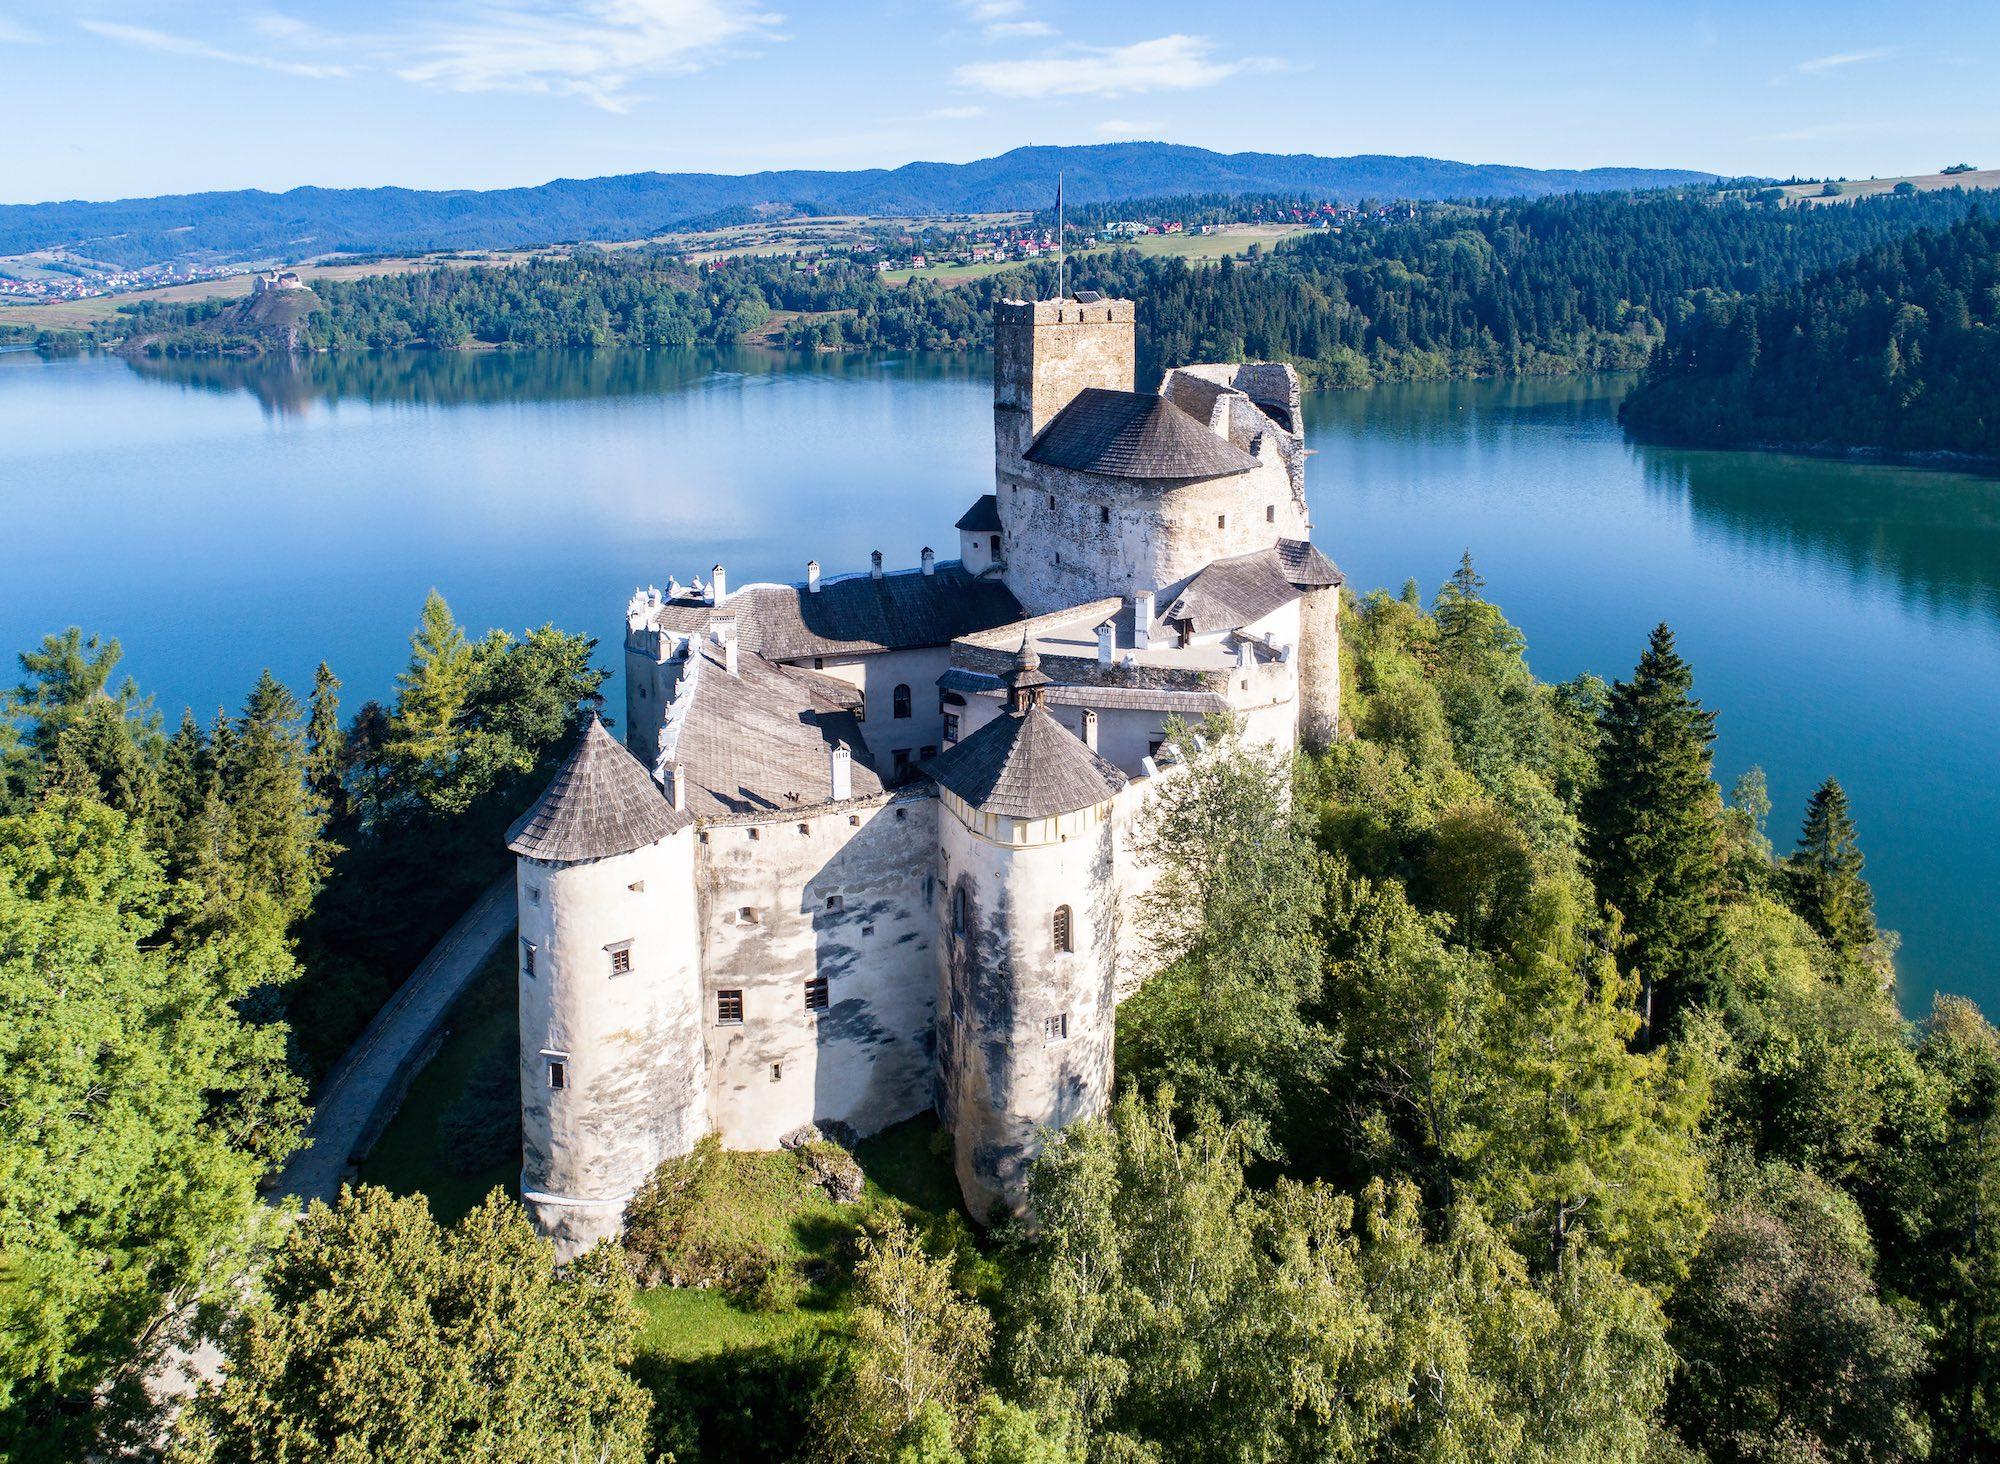 The Castle in Niedzica, towering over the Czorsztyn Reservoir, attracts tourists with its beautiful interiors and panoramas. Grand balls, organised by the castle owners in the past, made the residence famous on both sides of the border between Poland and Hungary. – © Nahlik